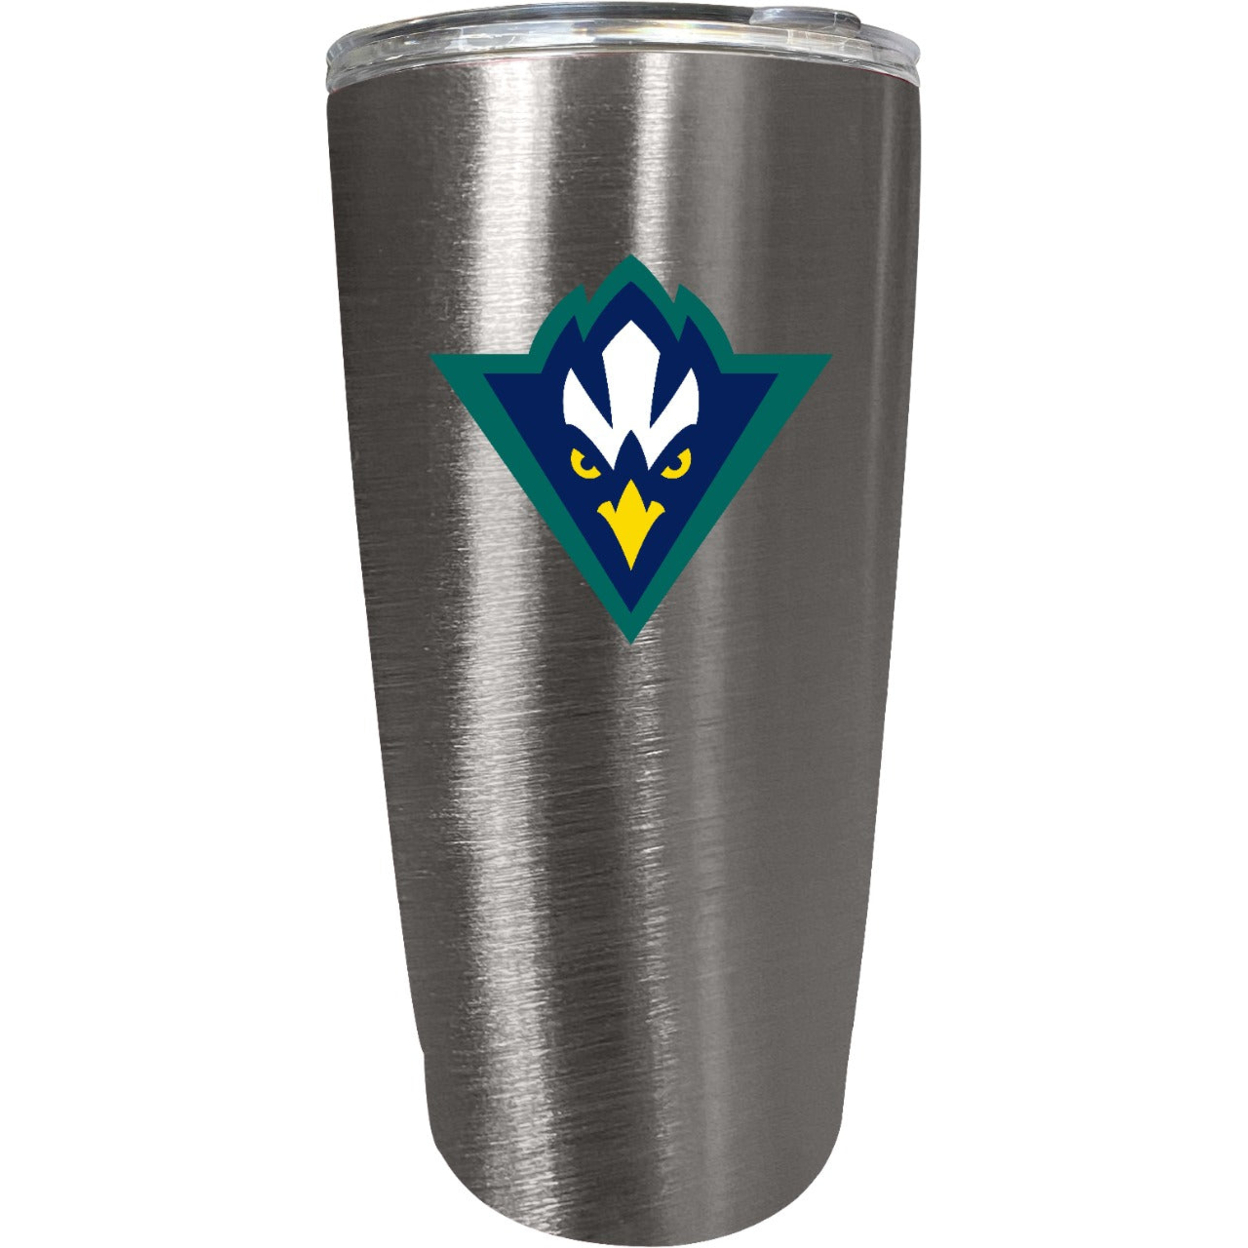 North Carolina Wilmington Seahawks 16 Oz Insulated Stainless Steel Tumbler Colorless